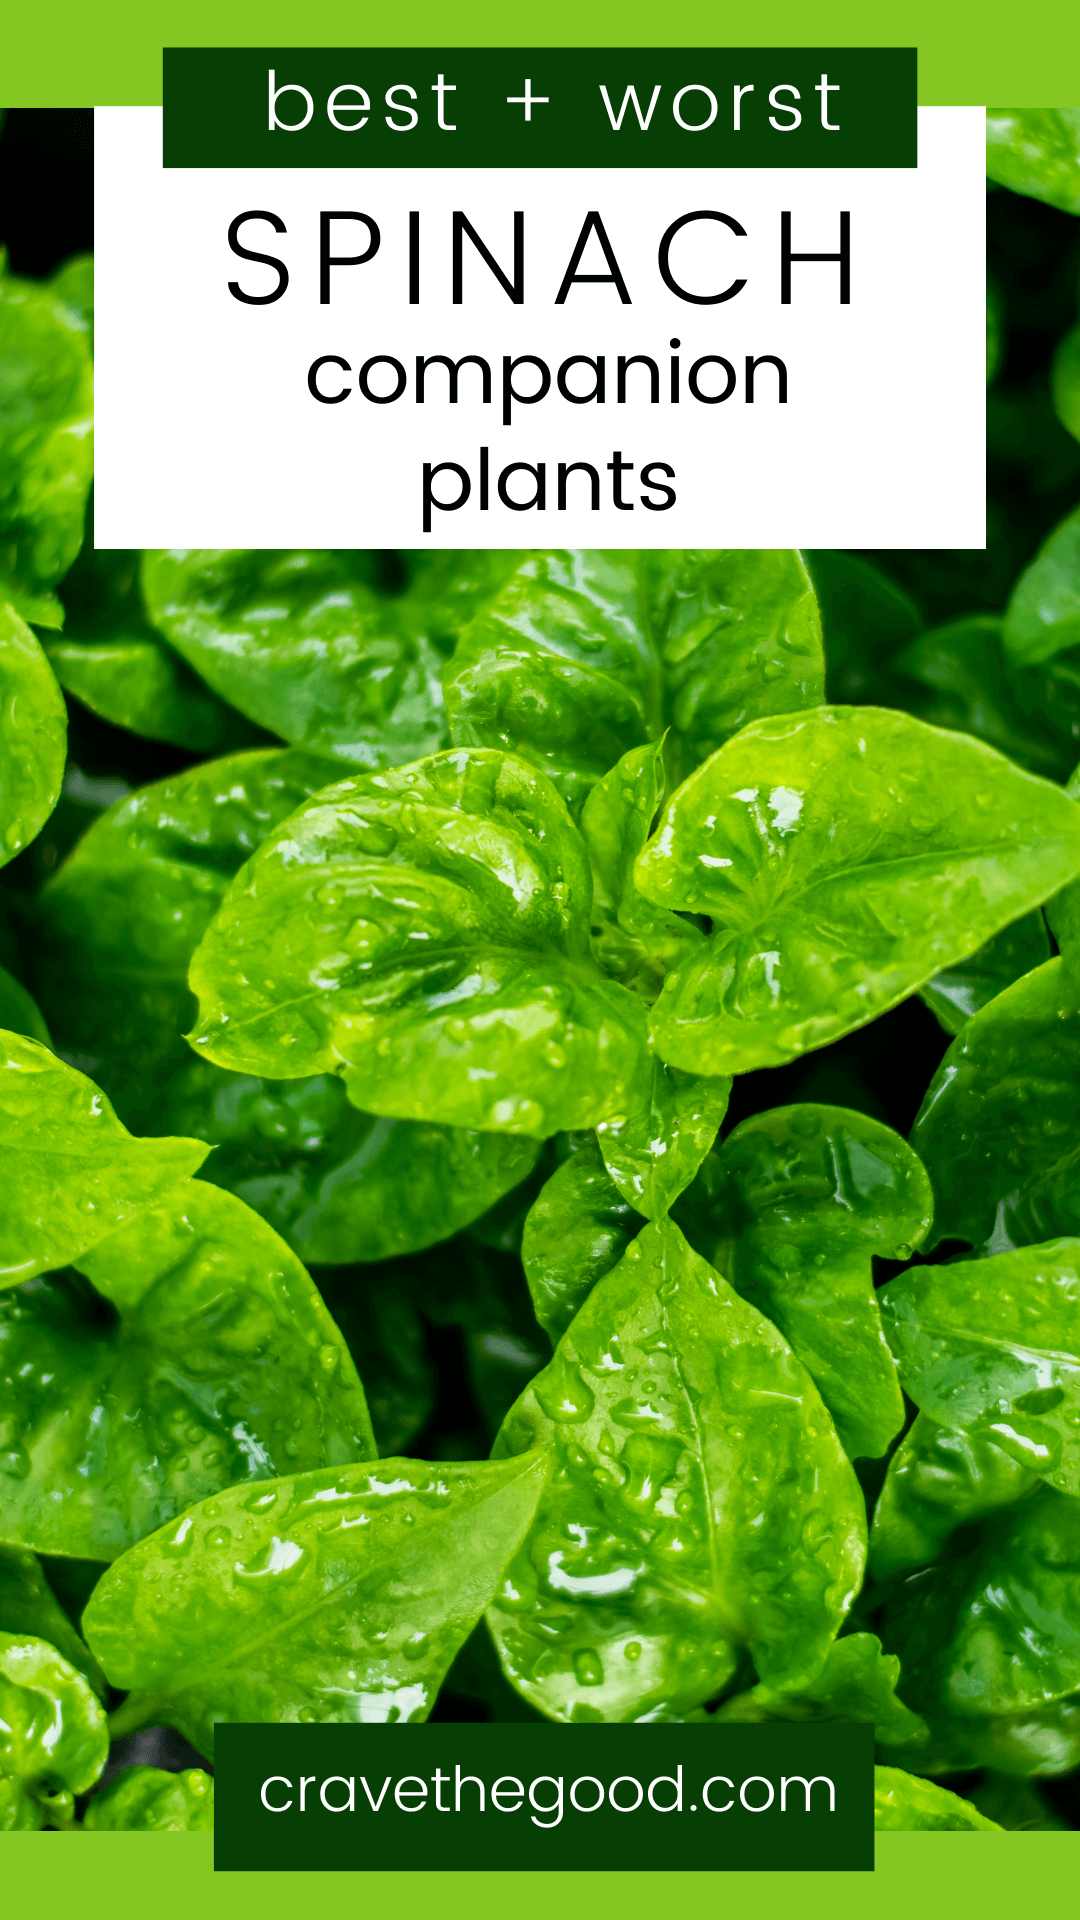 Best and worst spinach companion plants pinterest graphic.